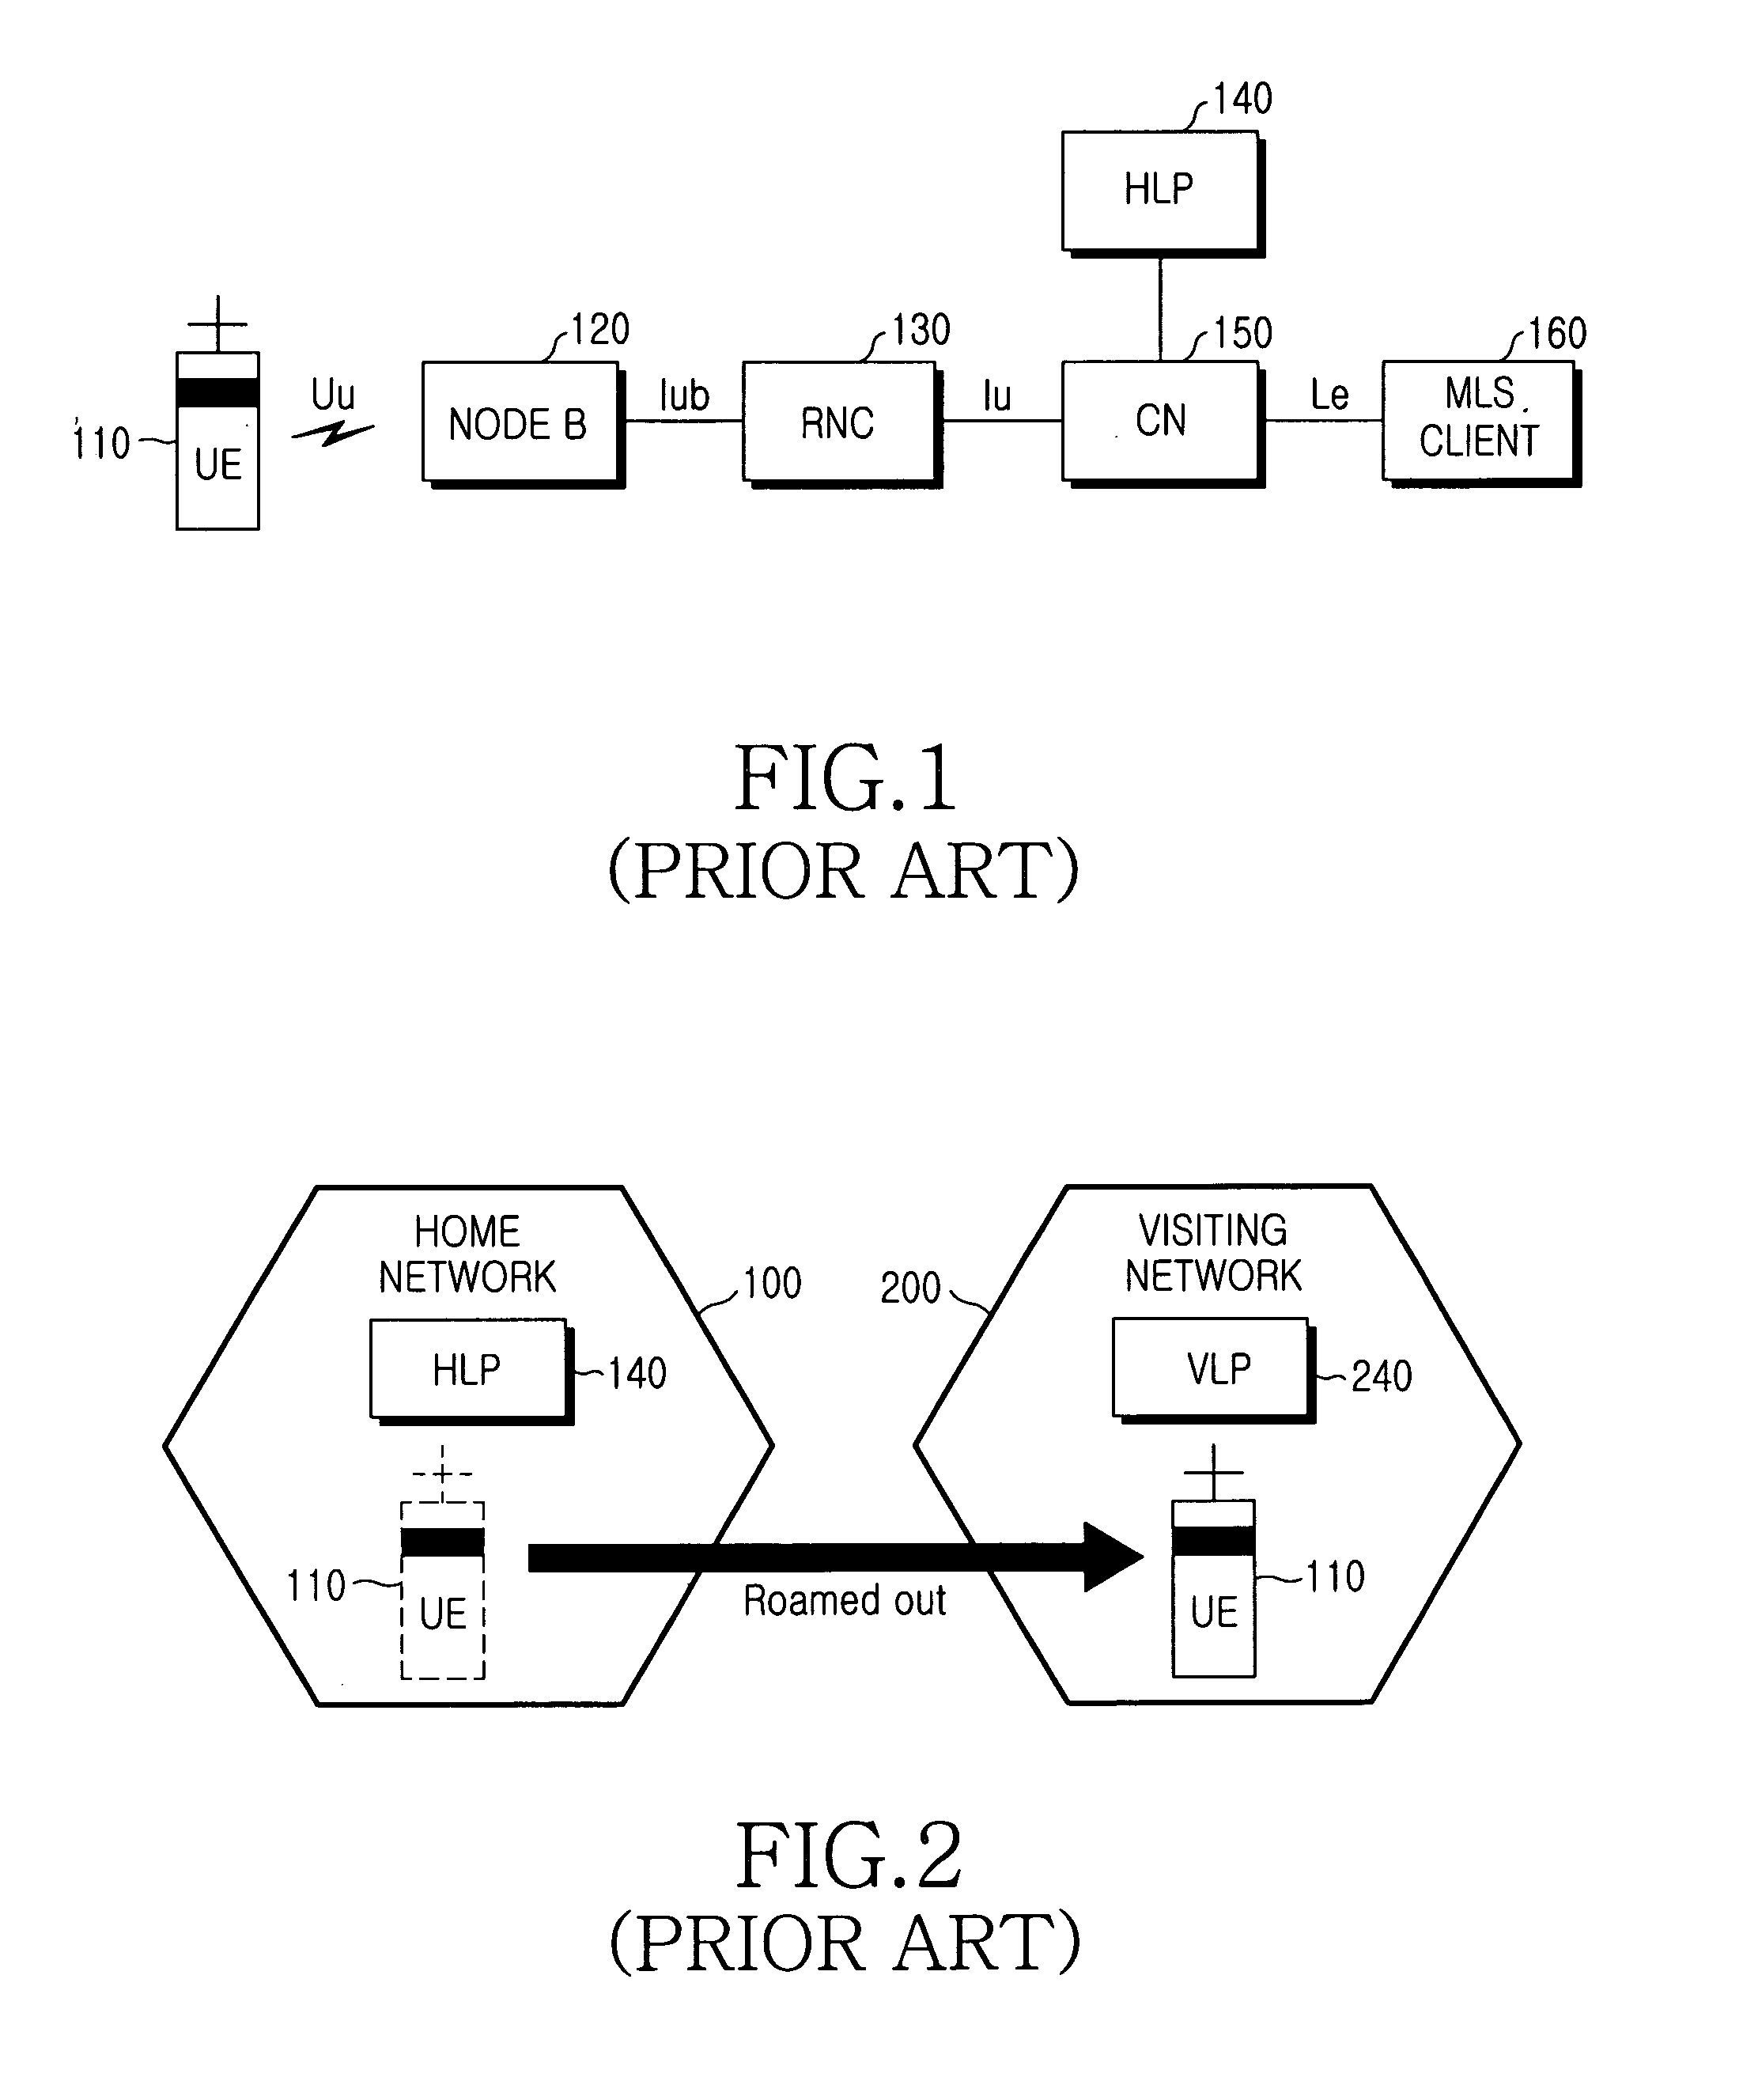 Method and apparatus for selecting a location platform for a user equipment to roam and method for determining a location of a user equipment using the same